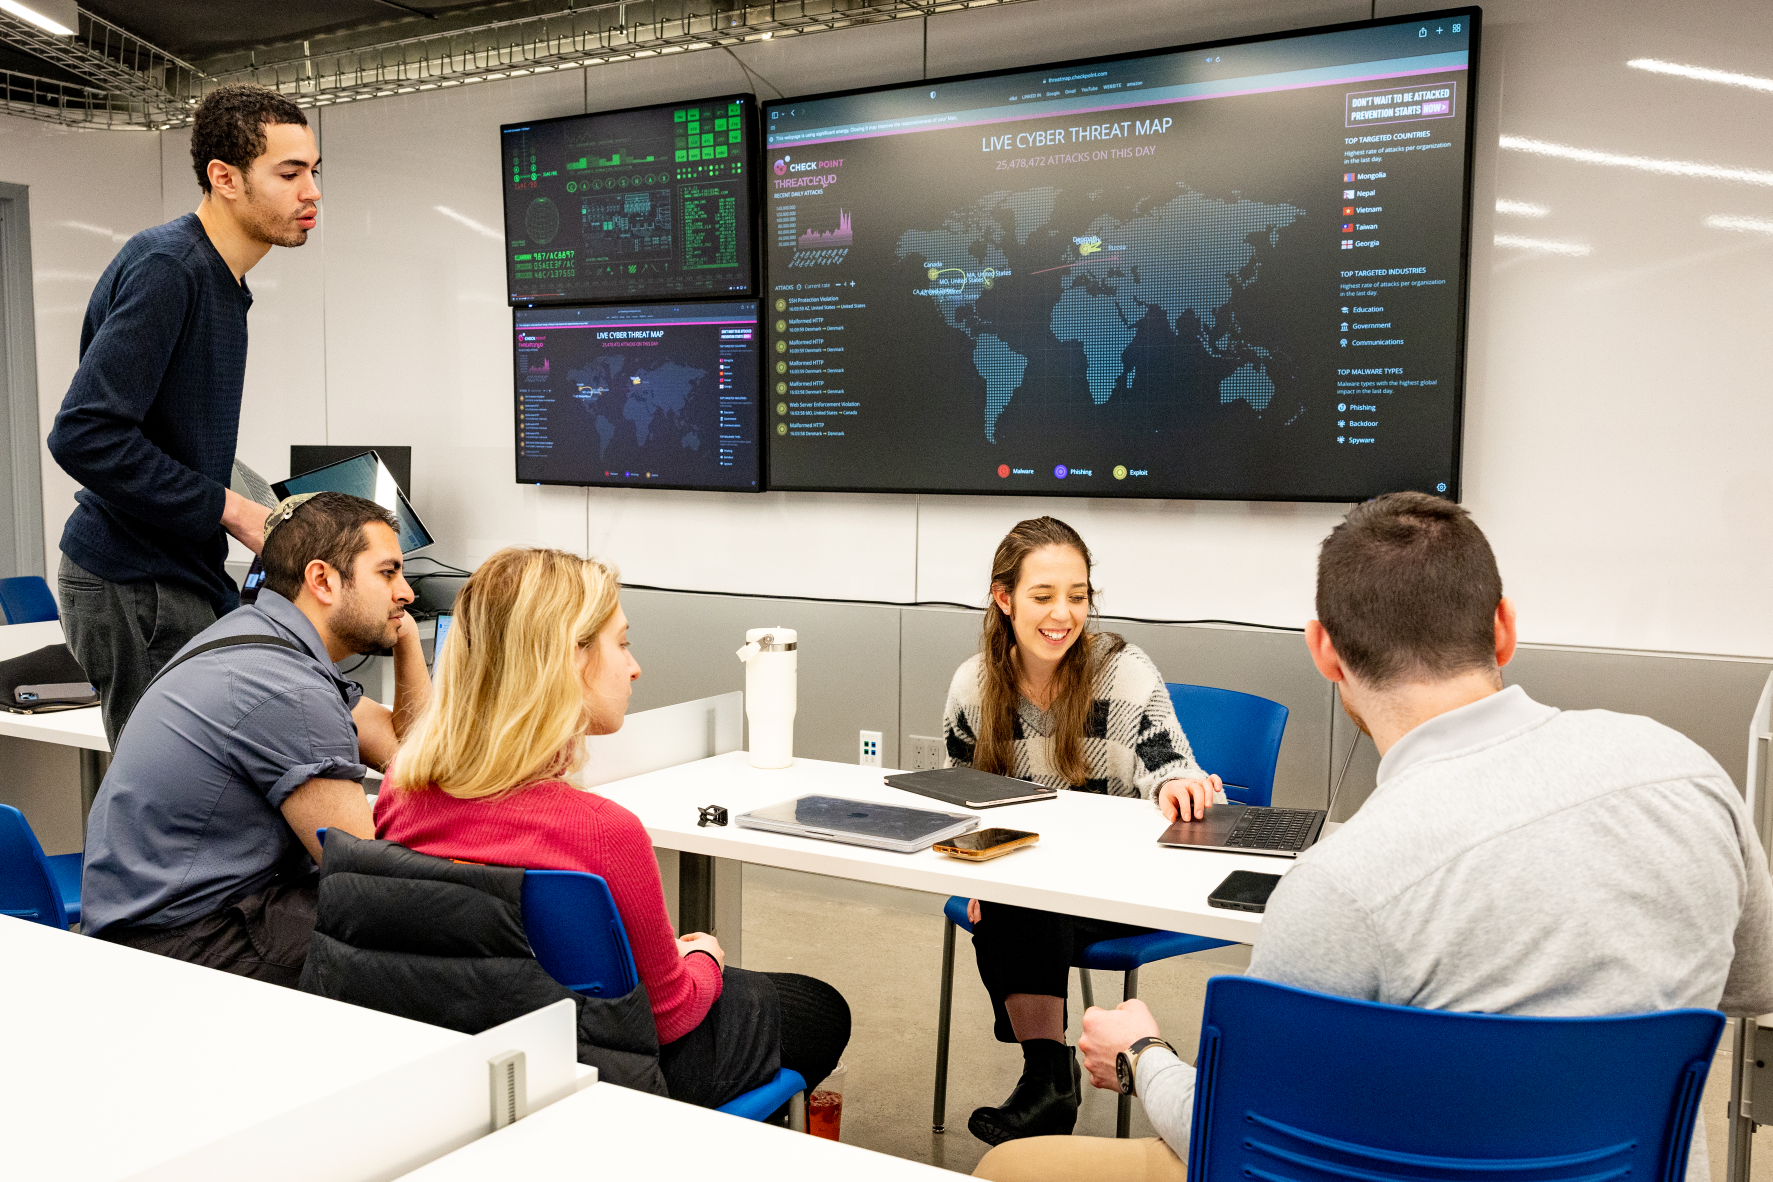 Yeshiva University Opens First-of-its-Kind Security Operations Center to Train the Next Generation of Cybersecurity Experts